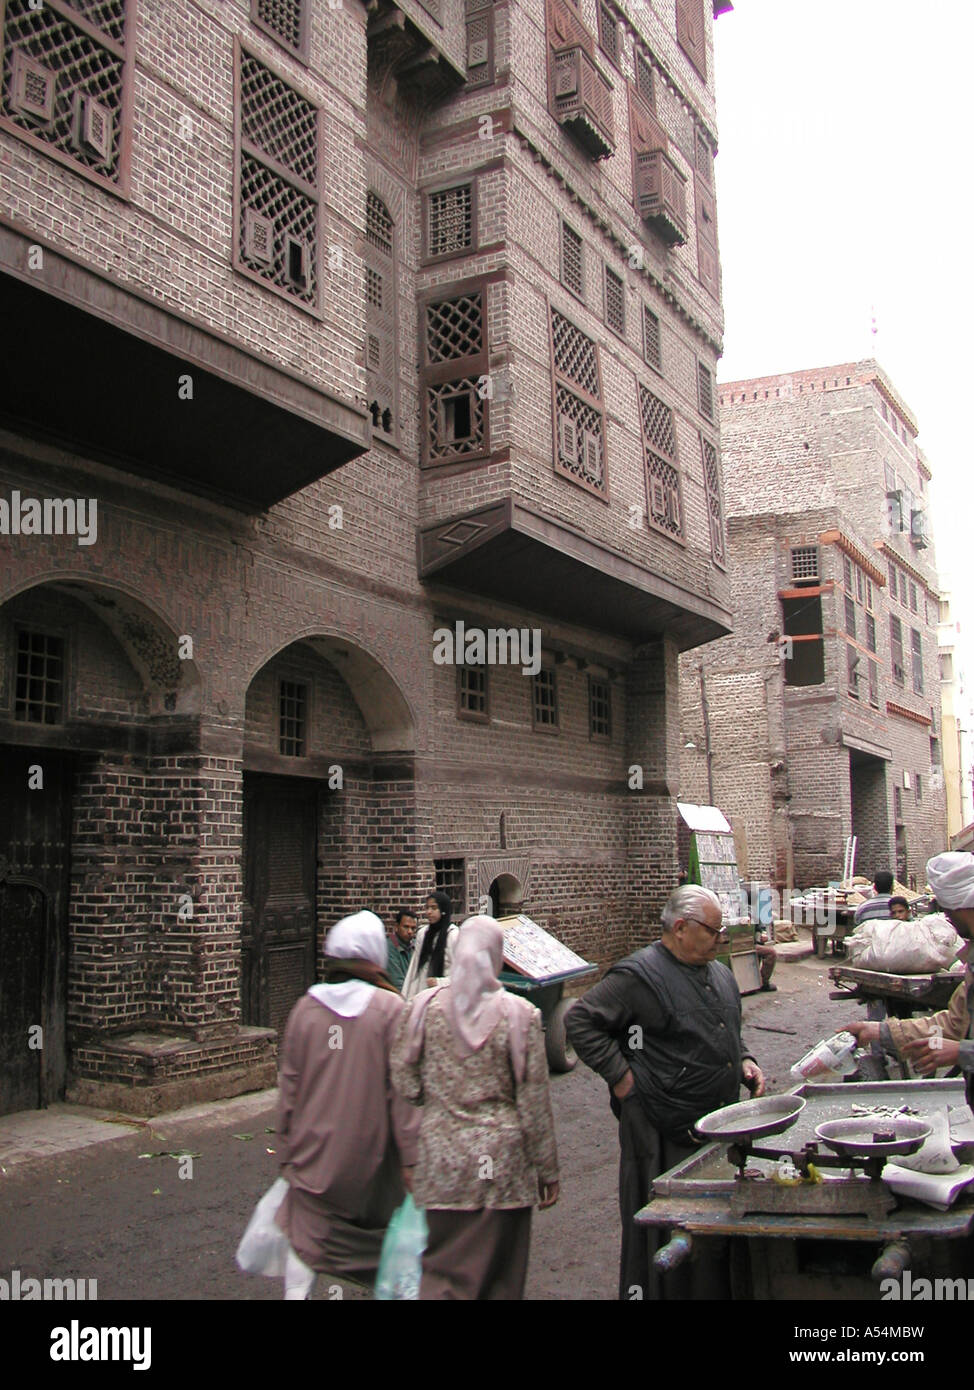 Painet ip1651 5780b egypt traditional architecture rachid country developing nation less economically developed culture Stock Photo